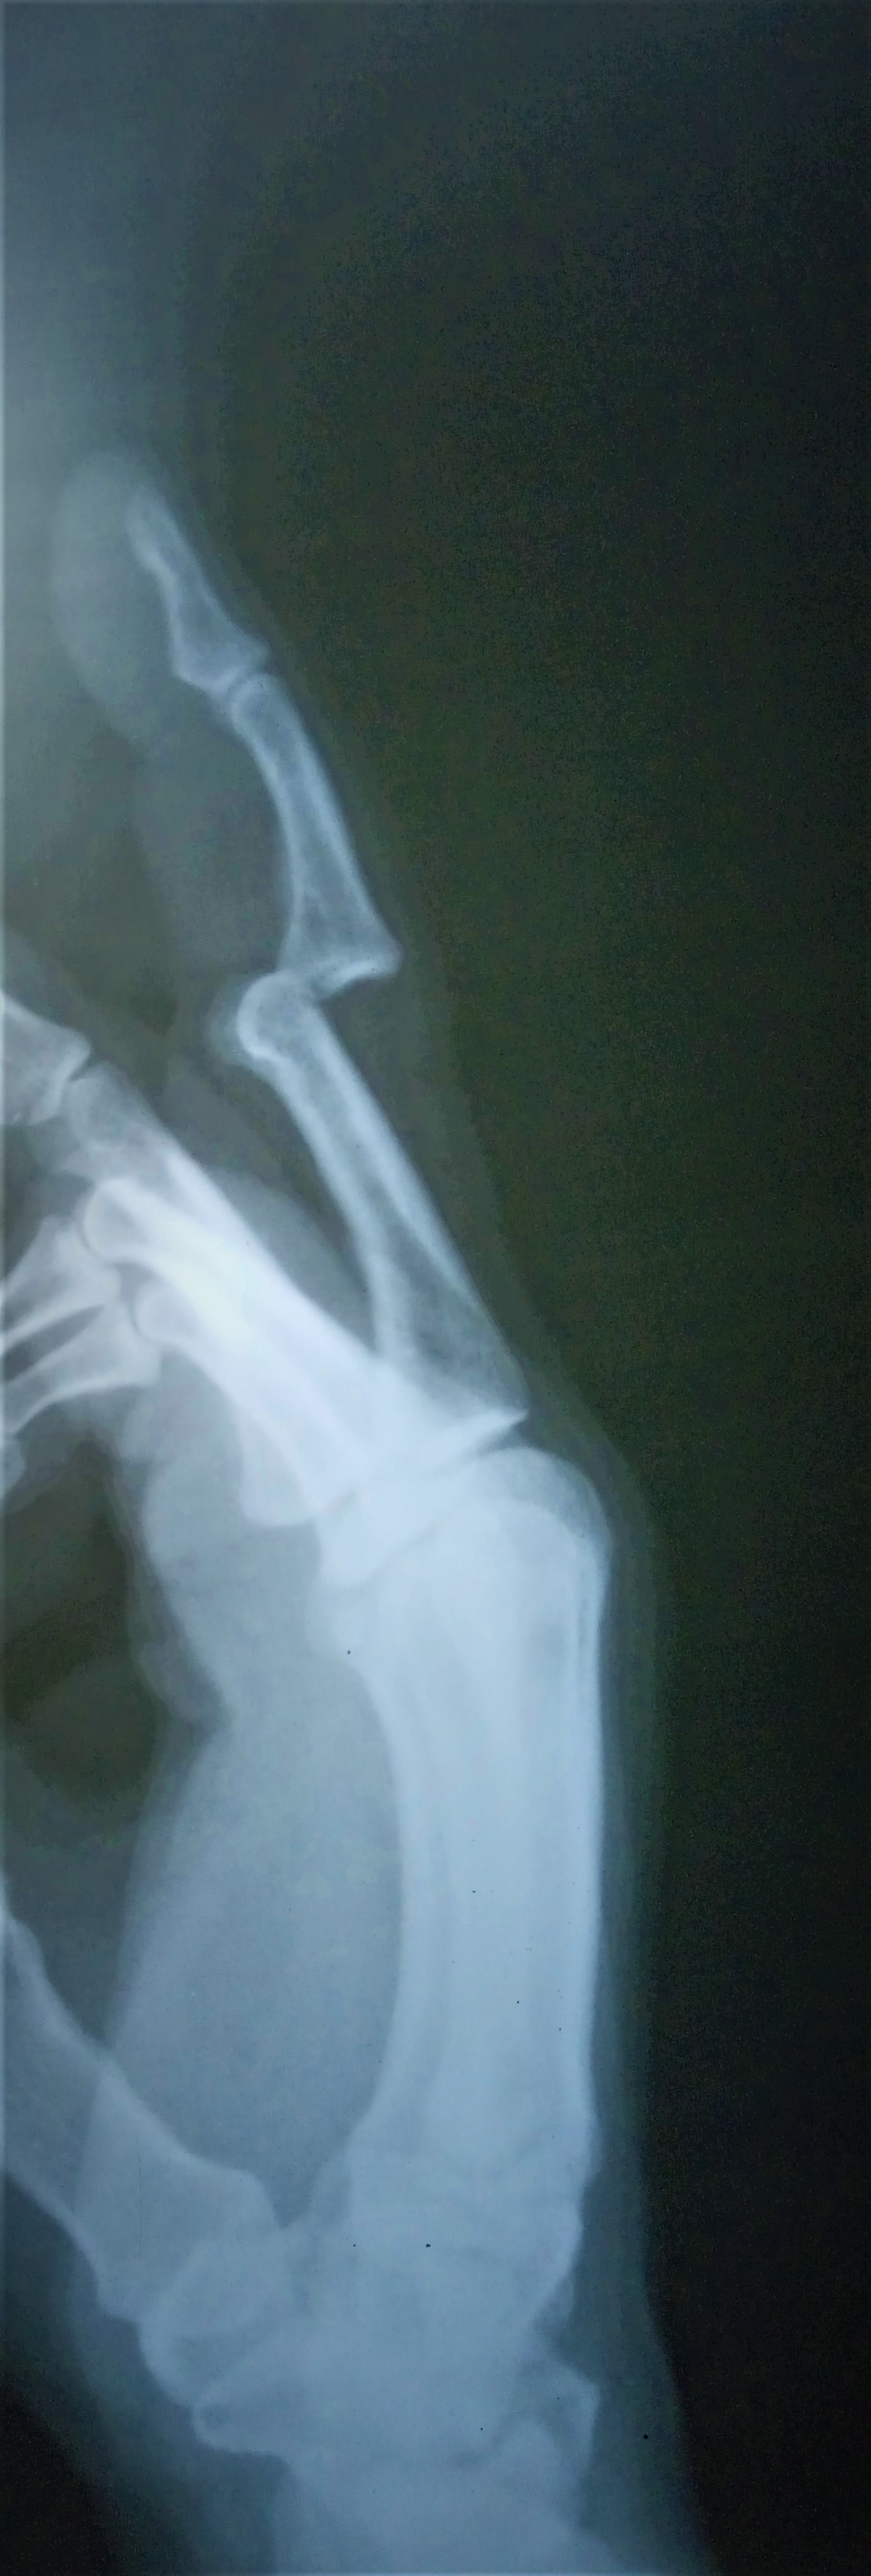 PIP Joint Dorsal Dislocation